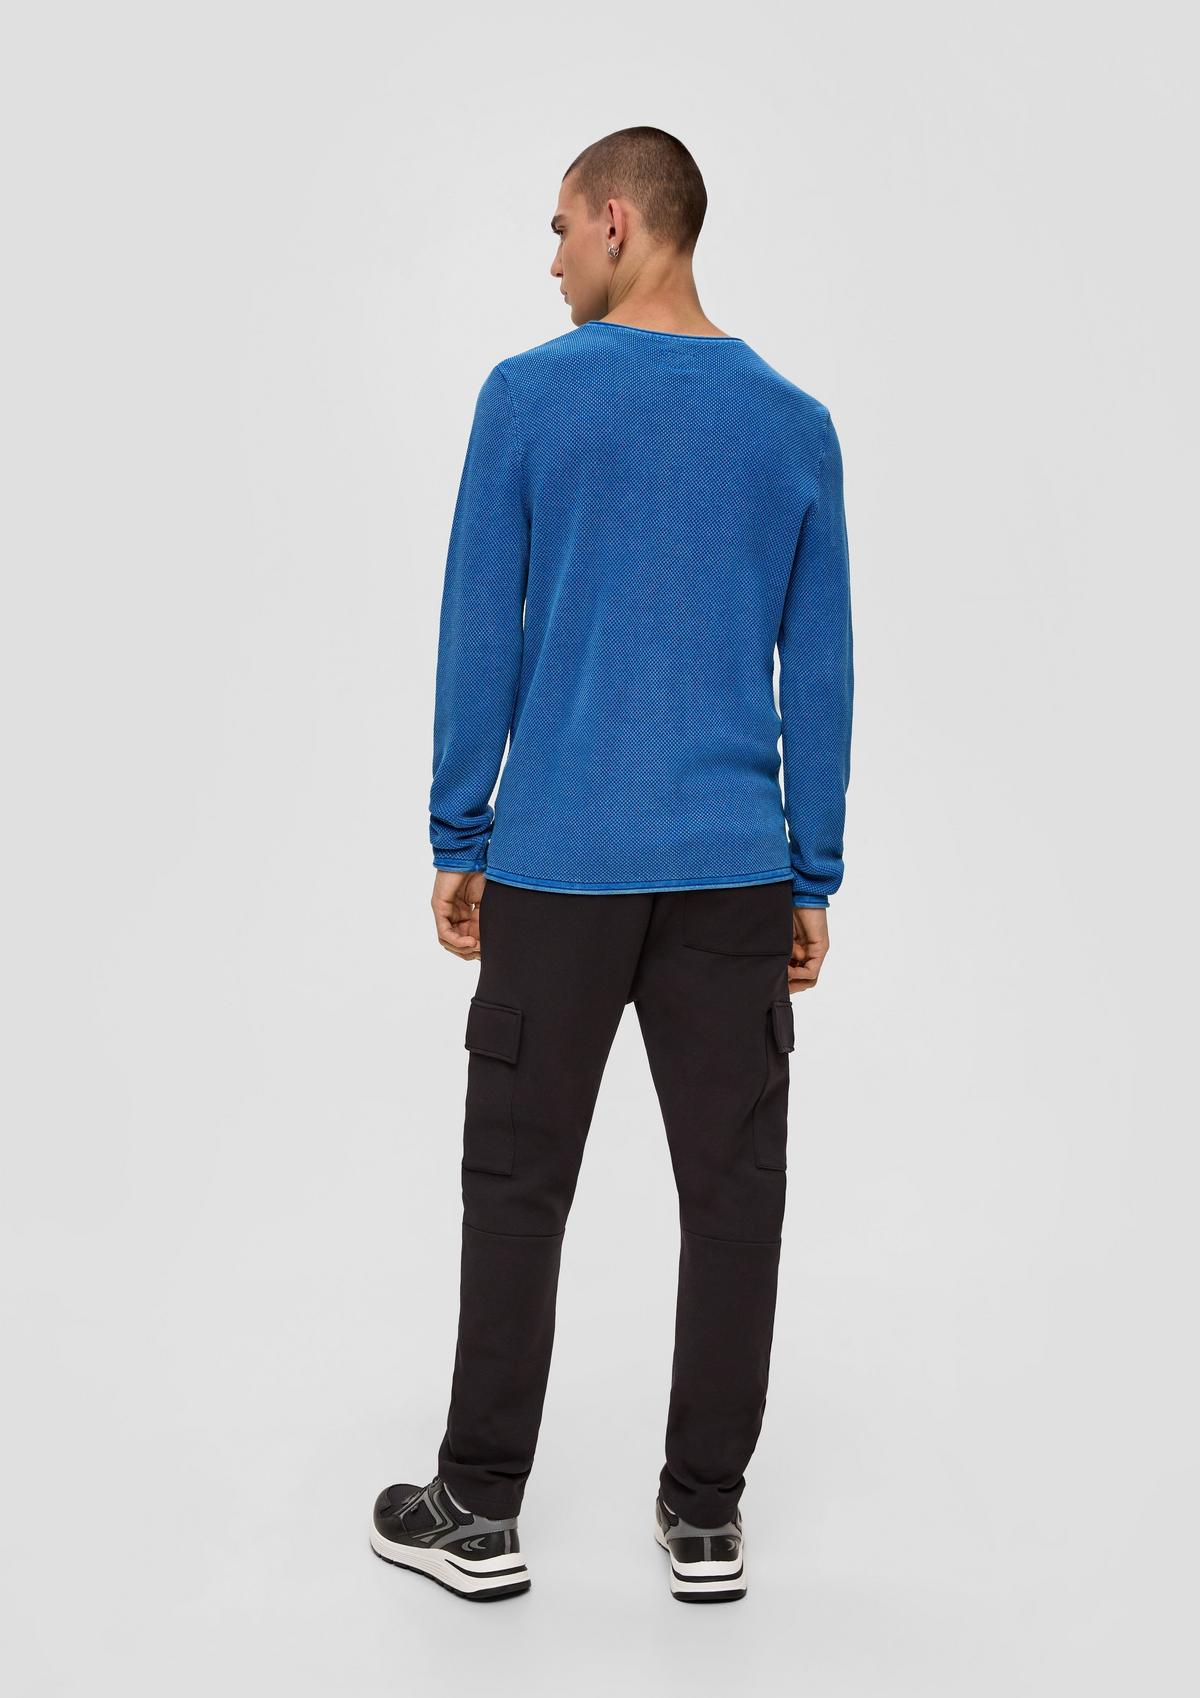 s.Oliver Lightweight knit jumper with a patterned texture